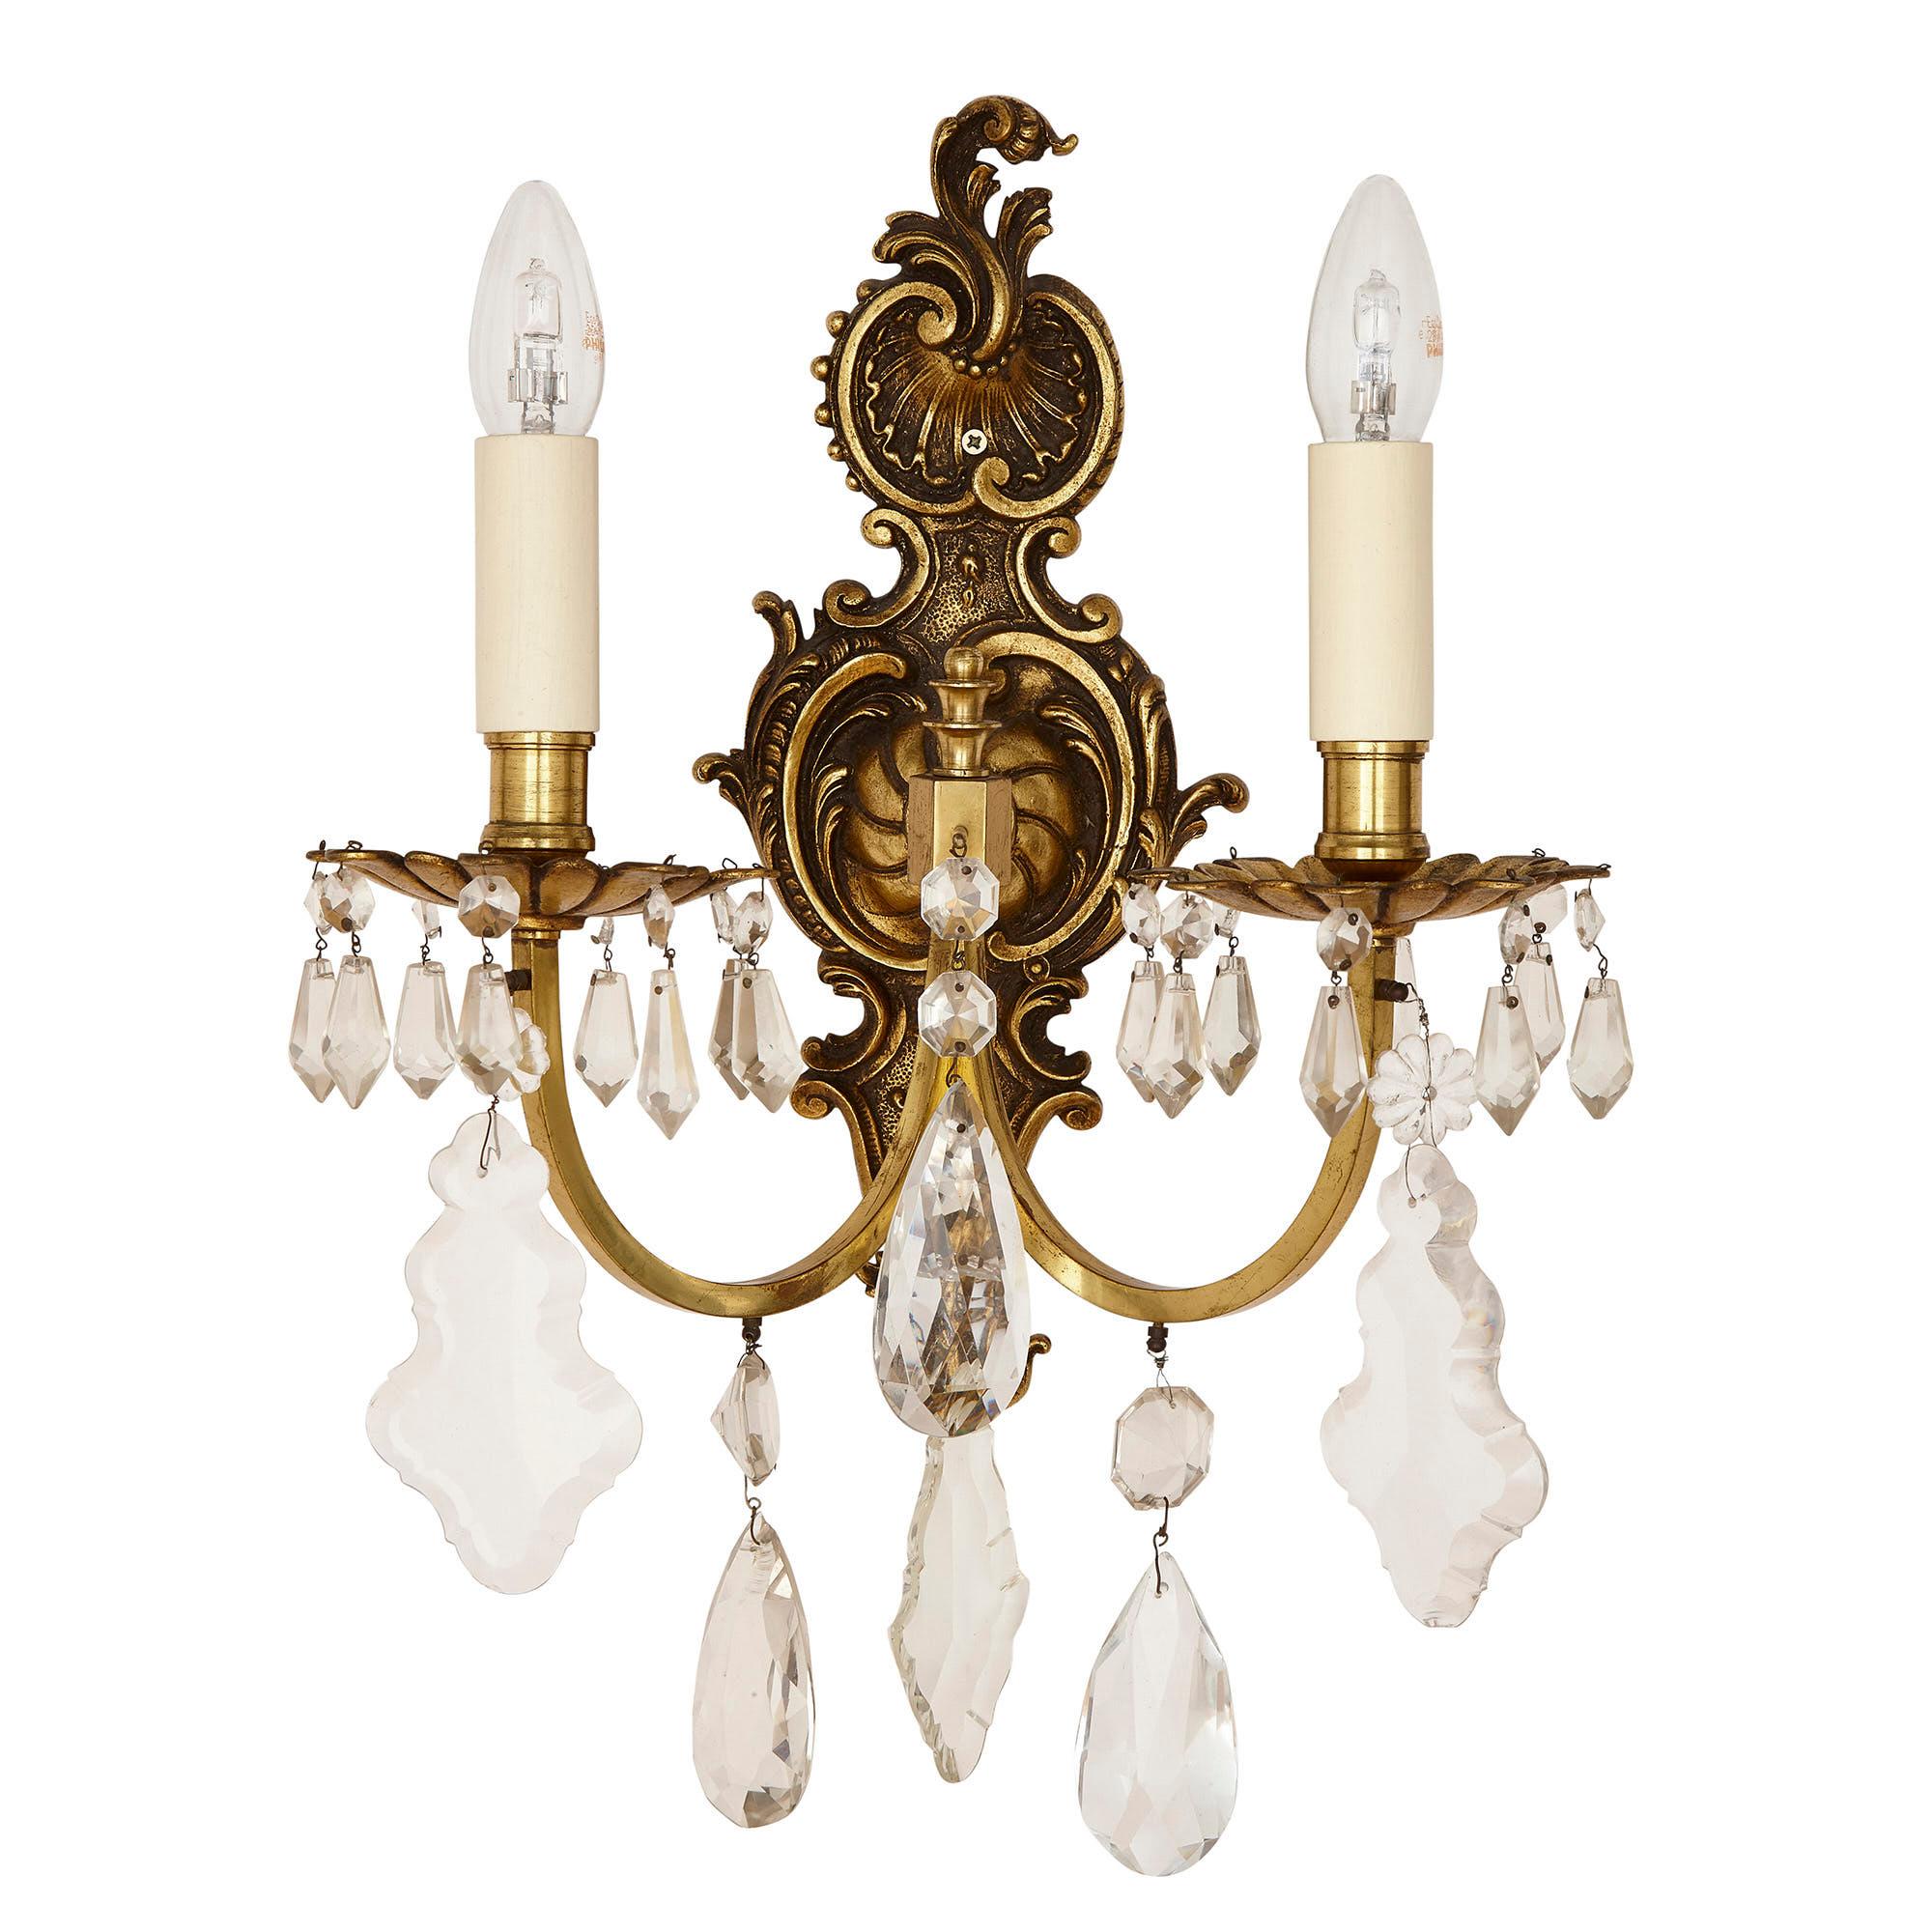 Pair of Louis XV style cut glass sconces
French, early 20th century
Measures: Height 46cm, width 34cm, depth 21cm

The sconces in this pair are wrought from gilt metal in the Louis XV style. Each sconce features a shaped backplate moulded with